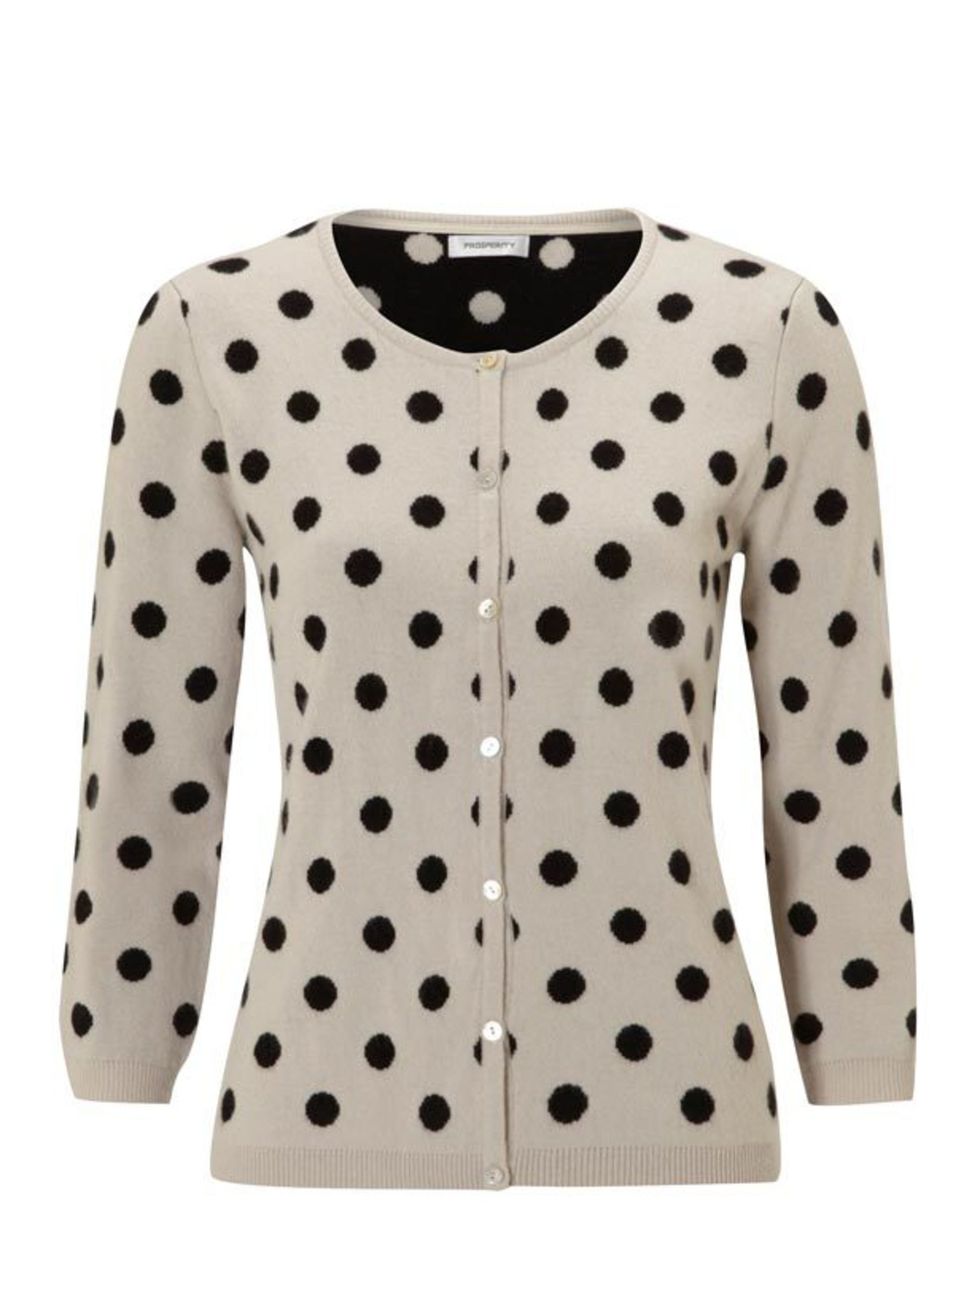 <p>Clements Ribeiro for John Lewis polka dot cardigan, £89, at <a href="http://www.johnlewis.com/267460/Product.aspx">John Lewis</a></p>